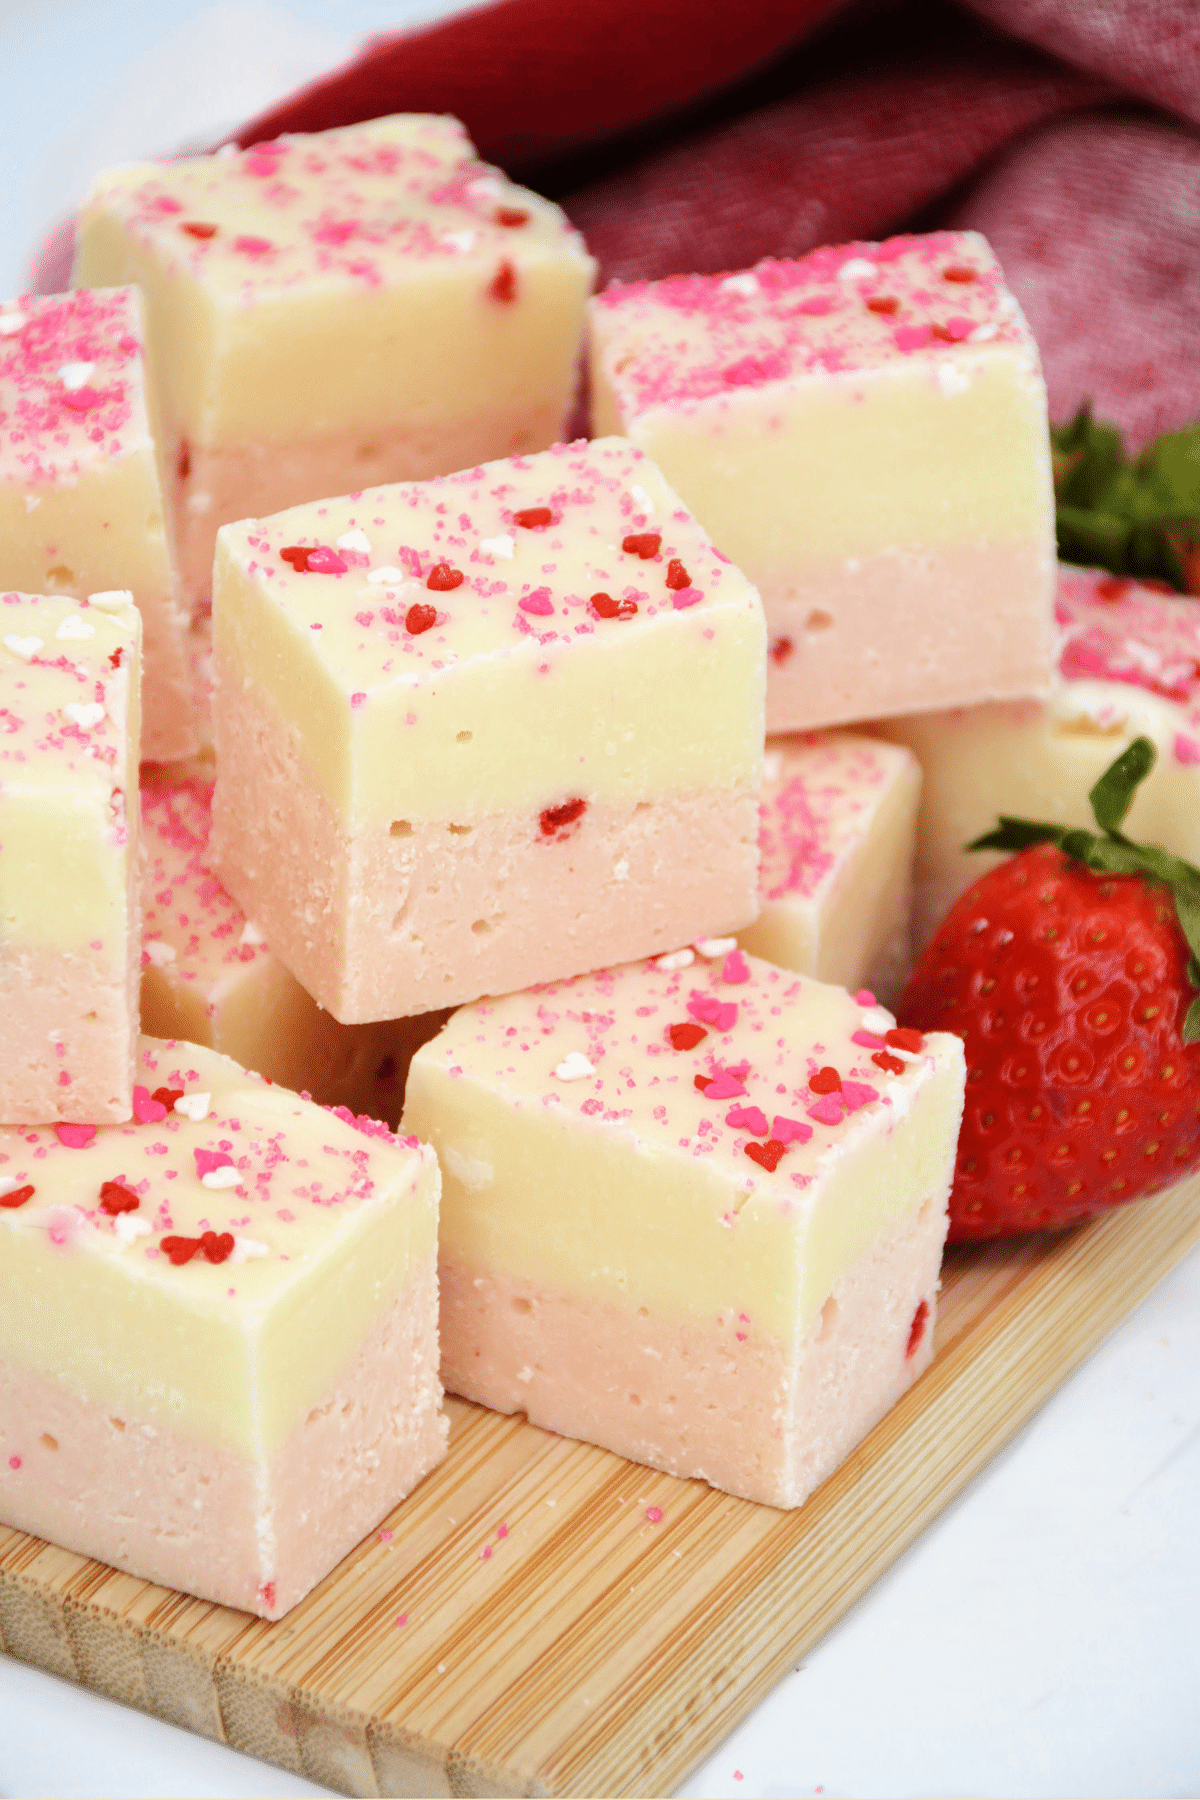 Pieces of White Chocolate Strawberry Fudge on a wooden board.